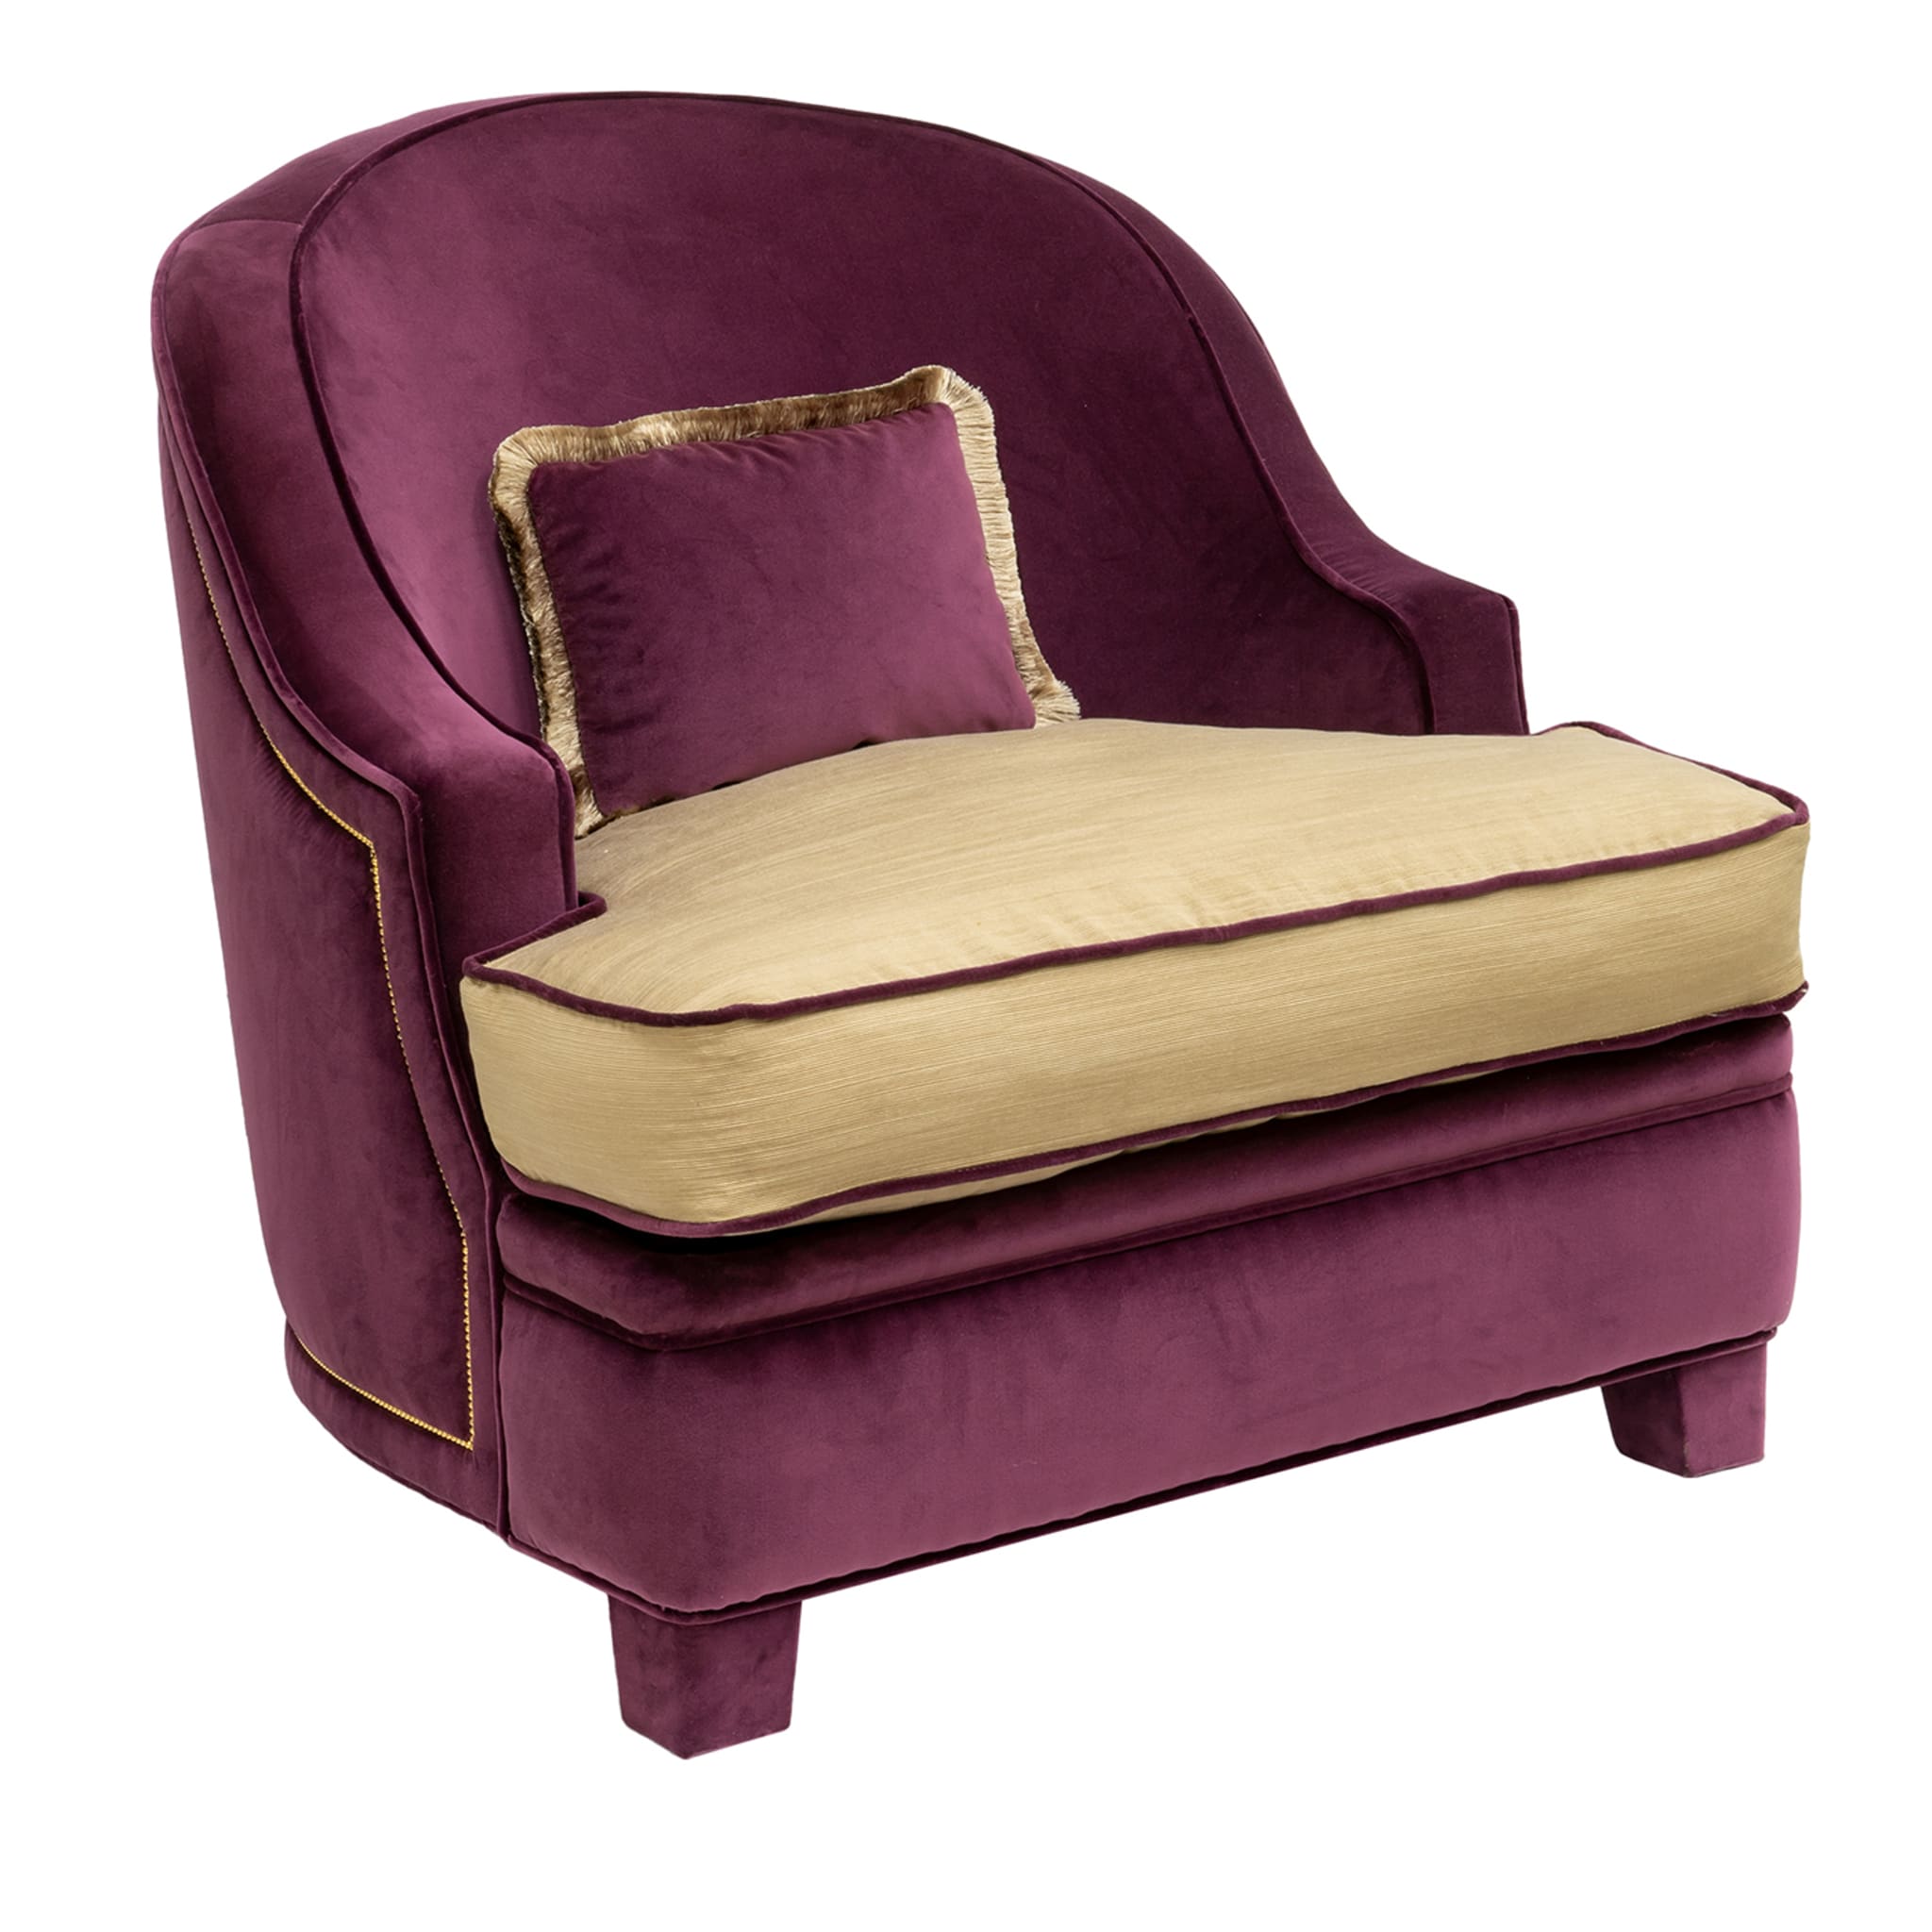 Classic-Style Armchair - Main view